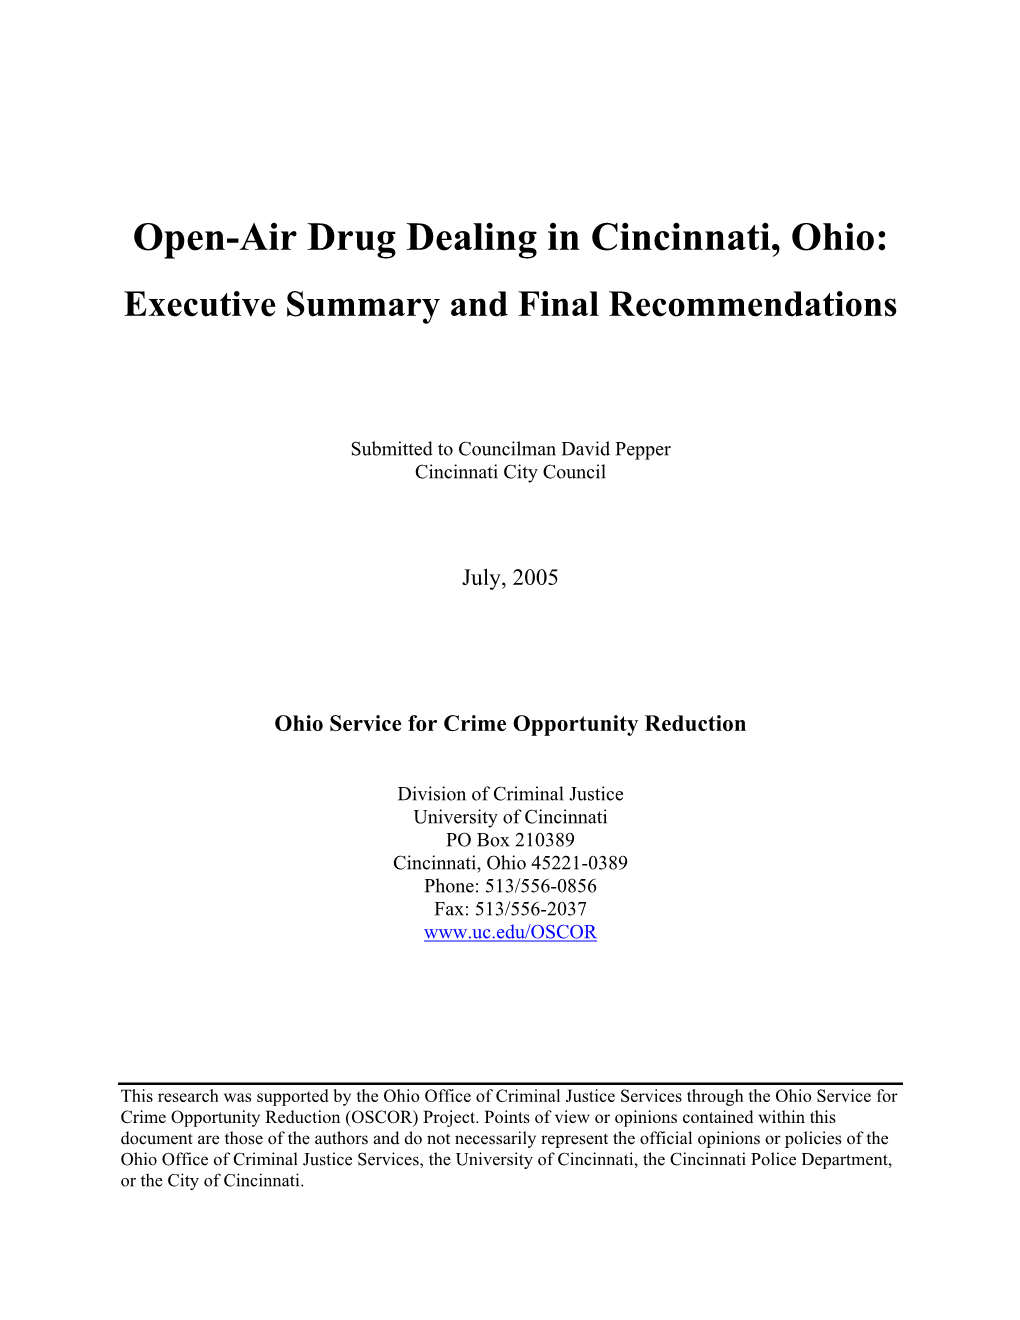 Open-Air Drug Dealing in Cincinnati, Ohio: Executive Summary and Final Recommendations